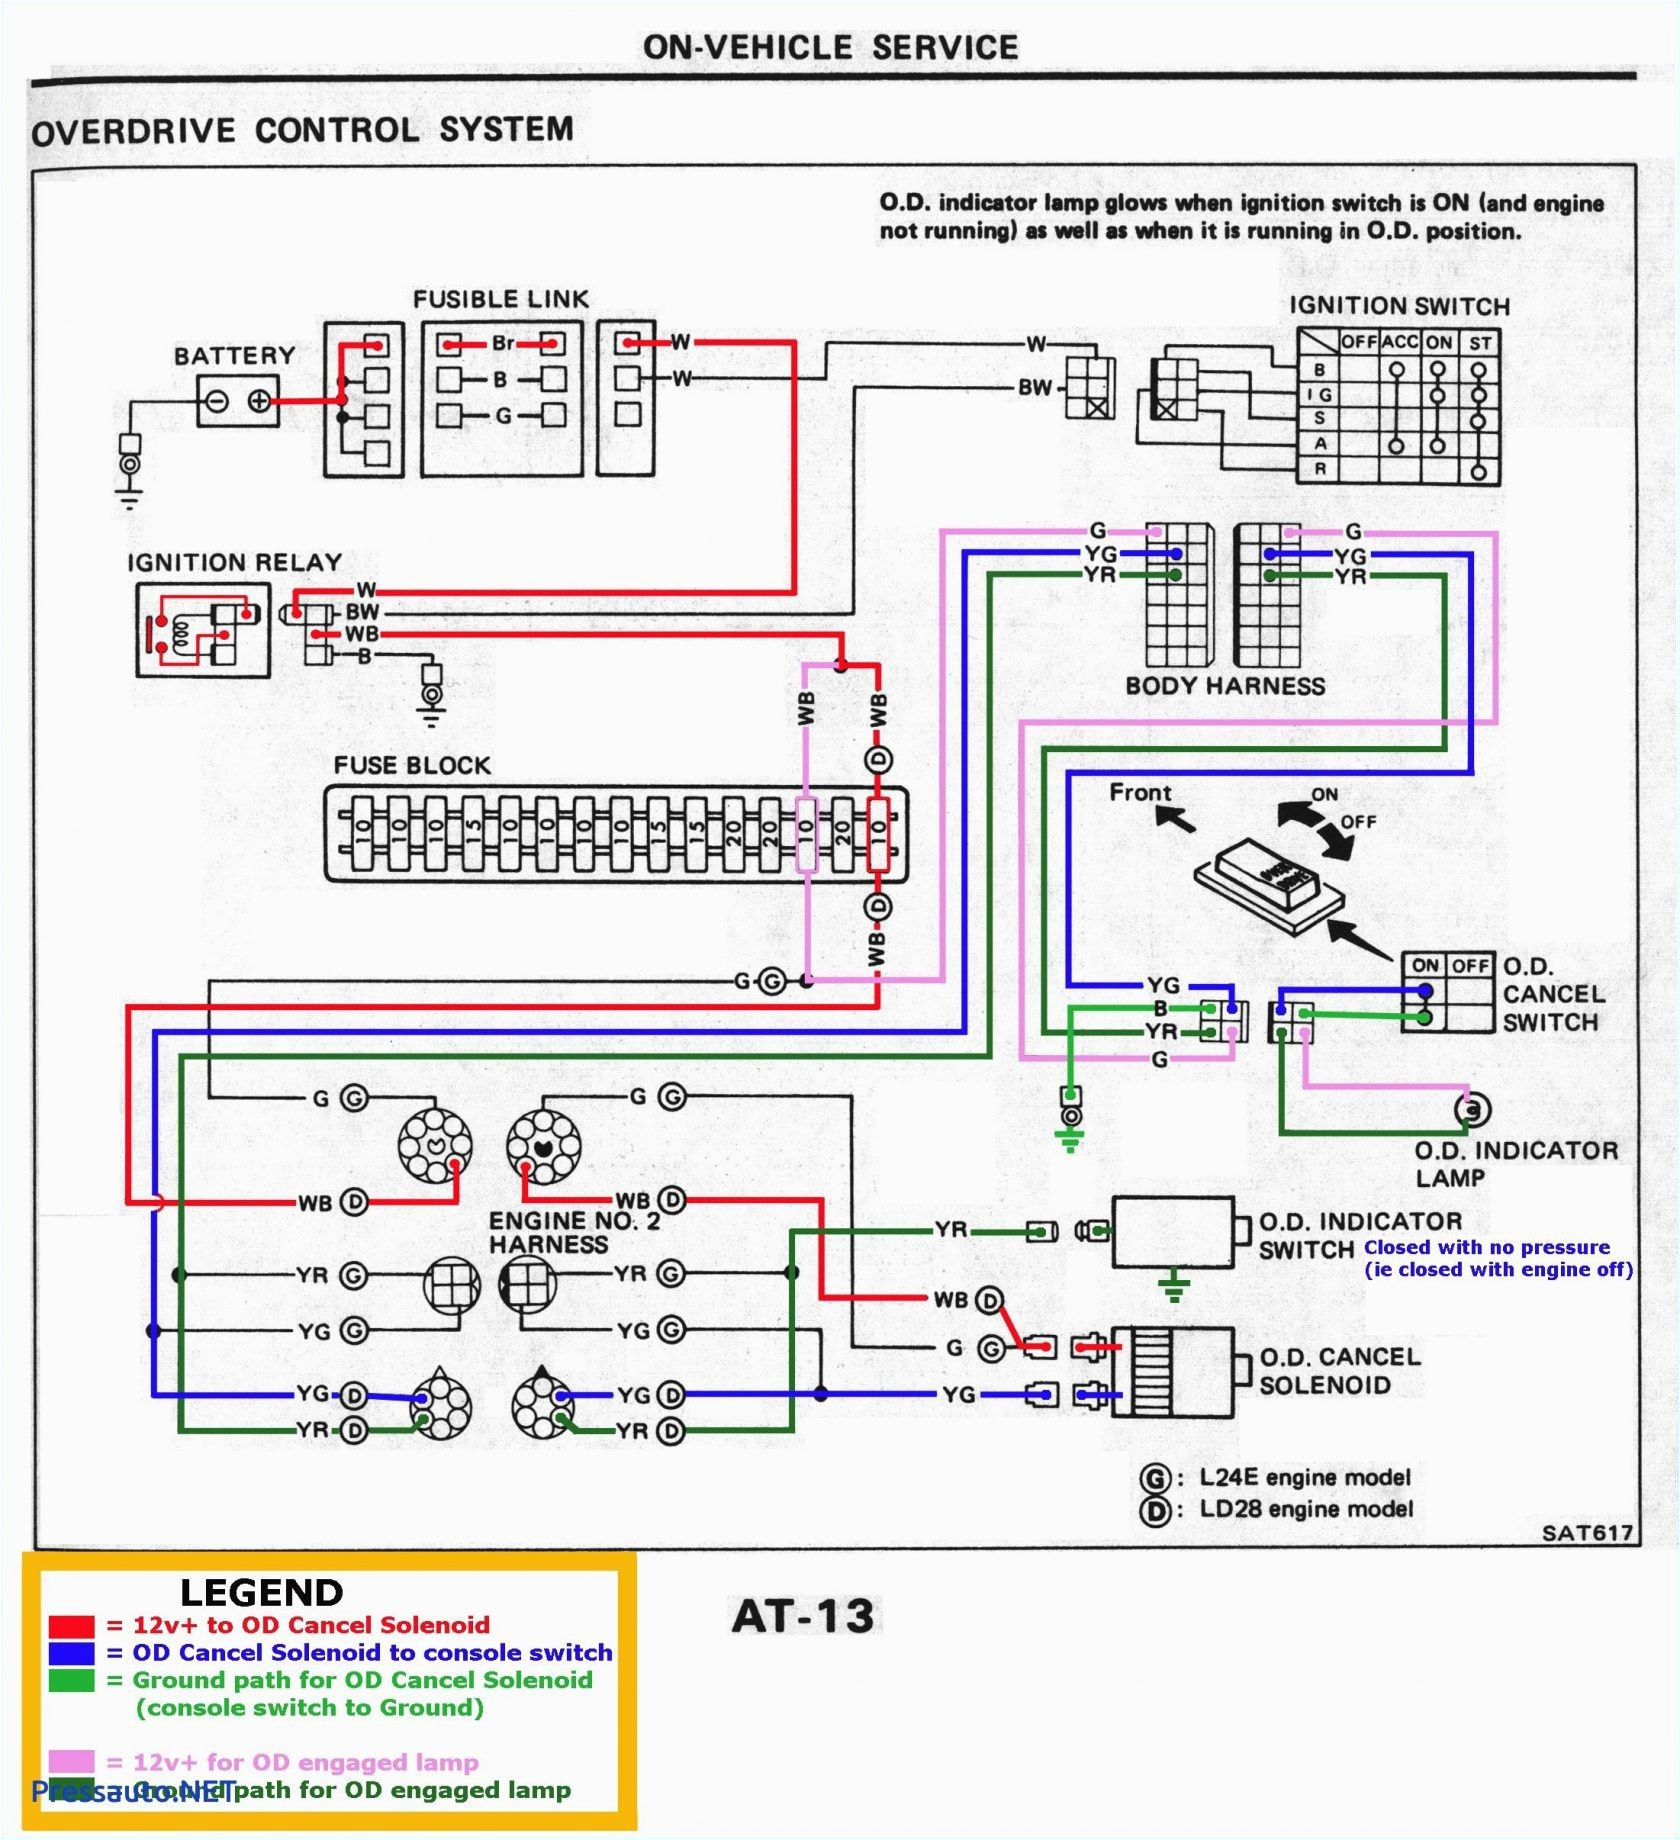 infiniti 97 wire harness installation get free image about wiring mustang headlight wiring harness diagram get free image about wiring